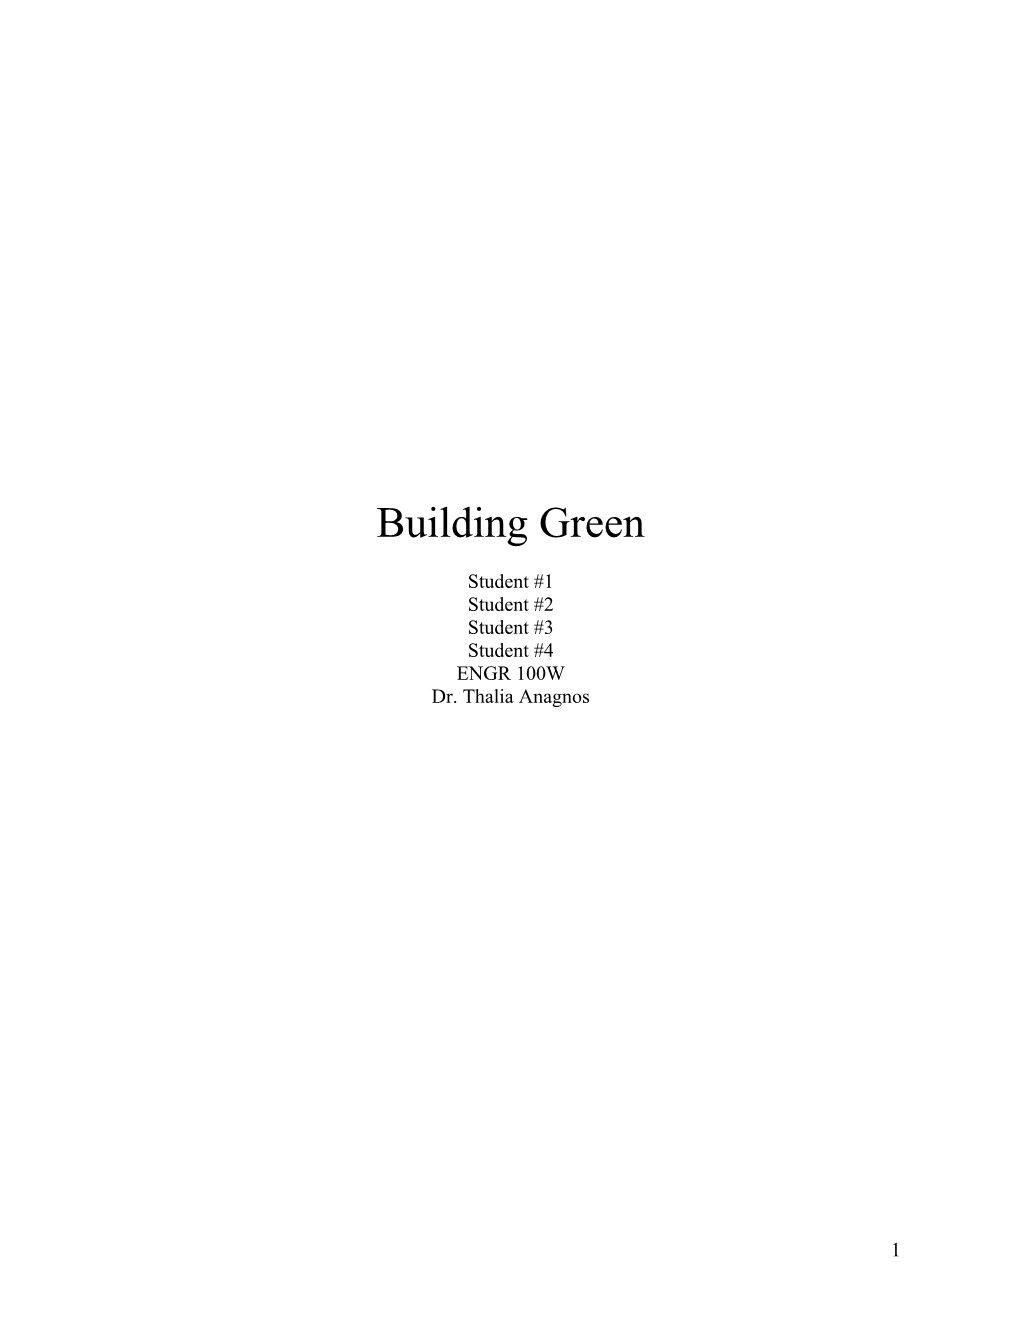 According to the Environmental Protection Agency, Buildings in the U